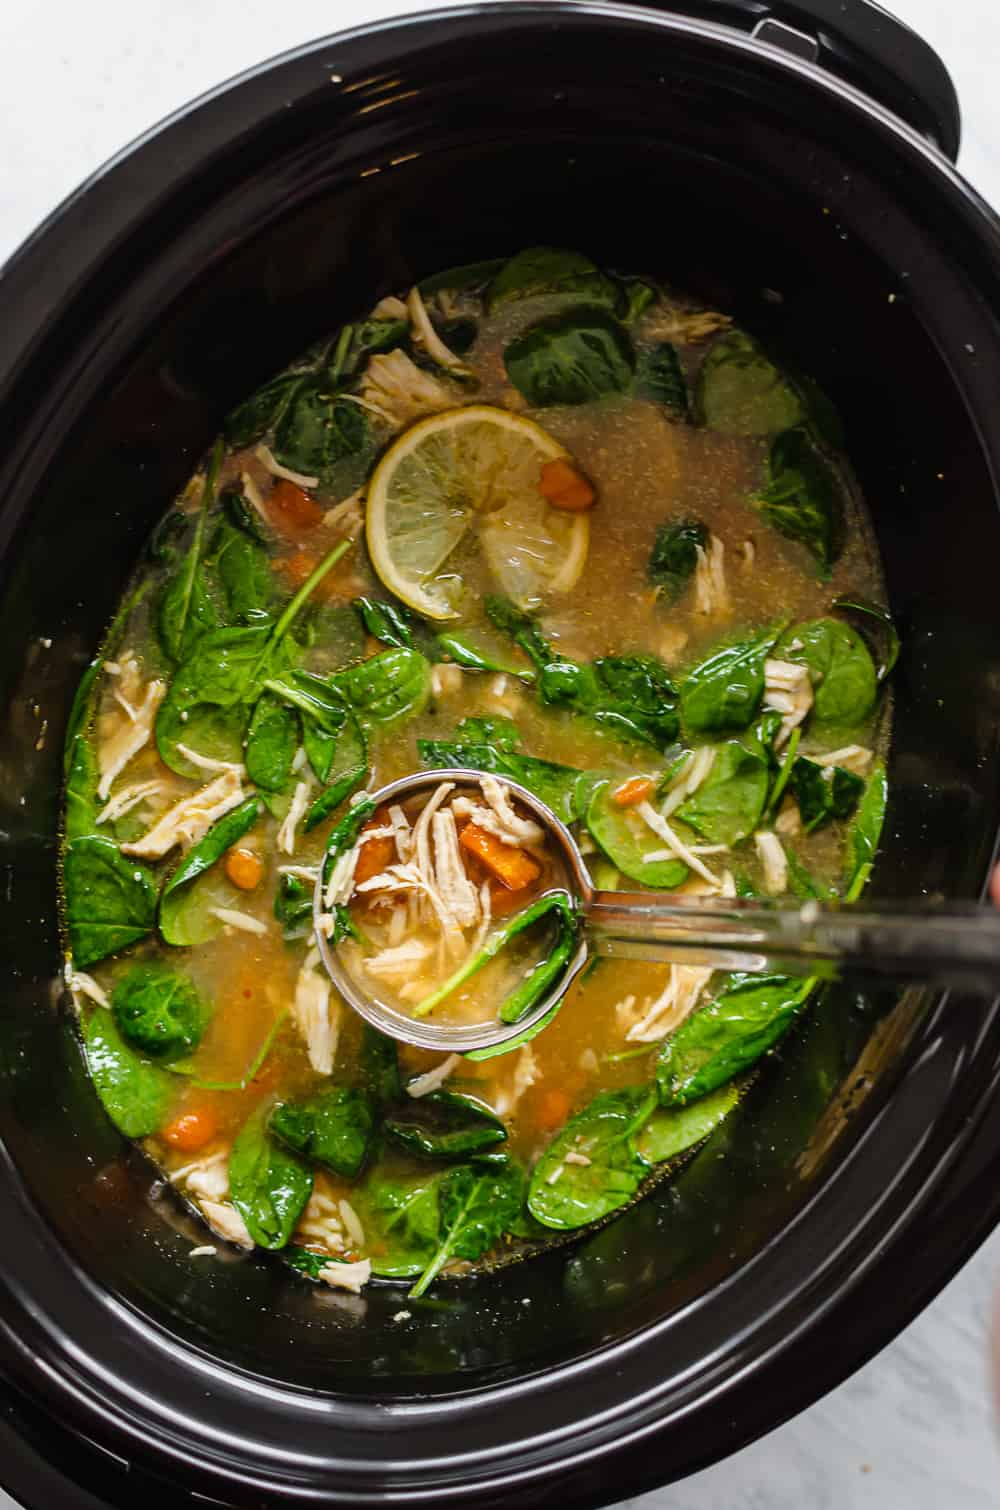 Lemon chicken Orzo soup being ladled out of the crockpot.